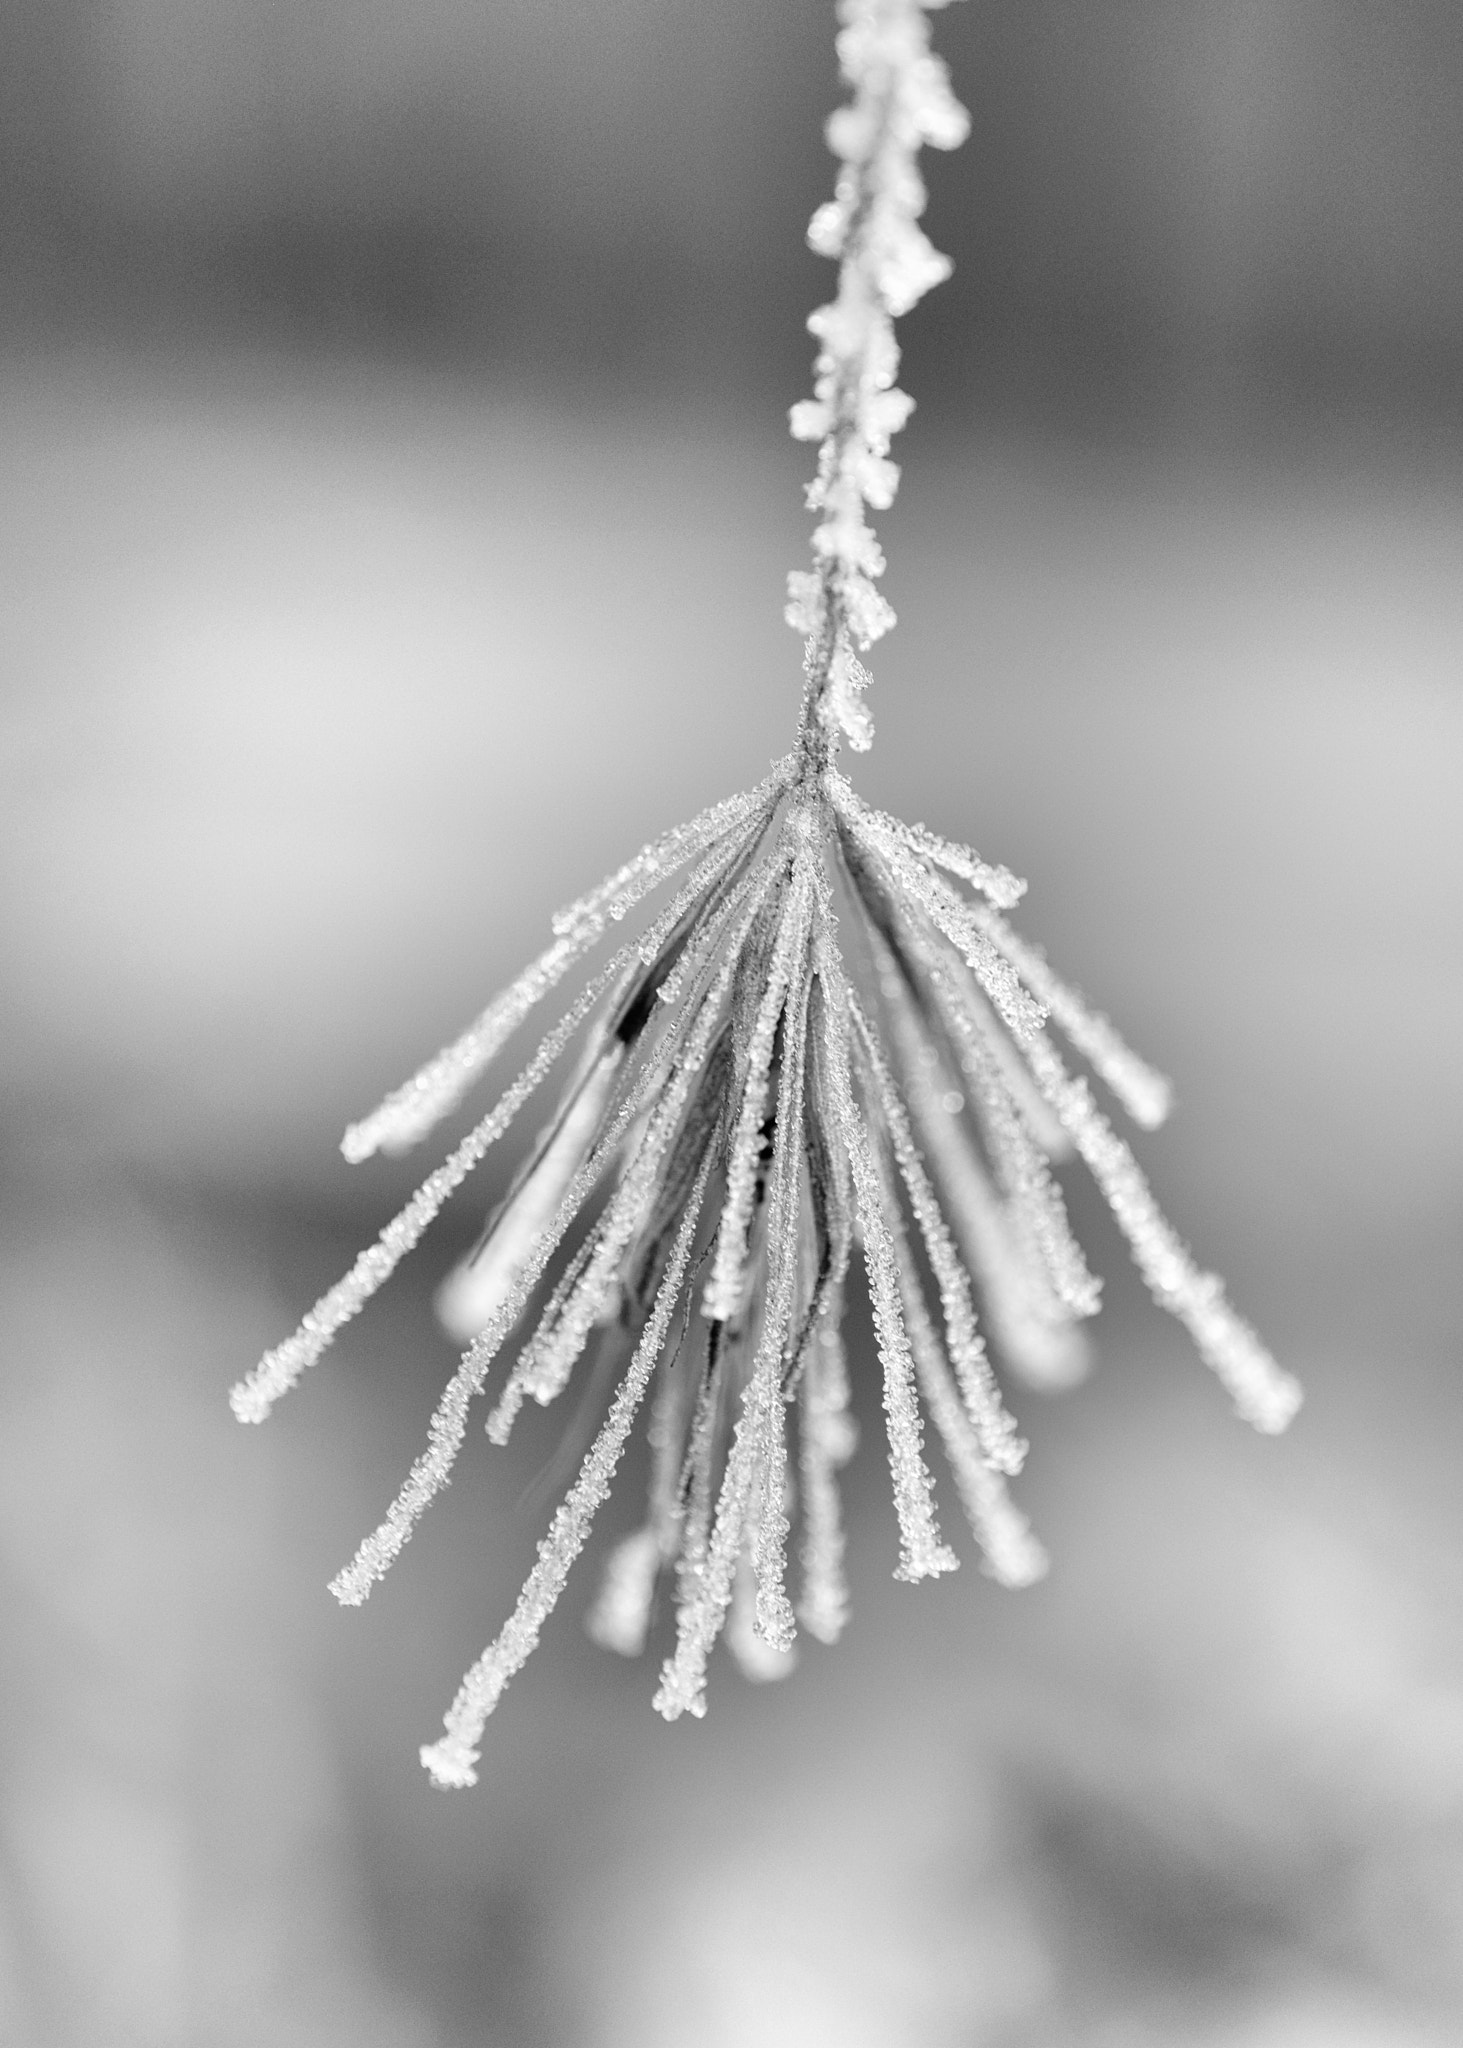 ZEISS Touit 50mm F2.8 sample photo. Frosty grass seed head photography